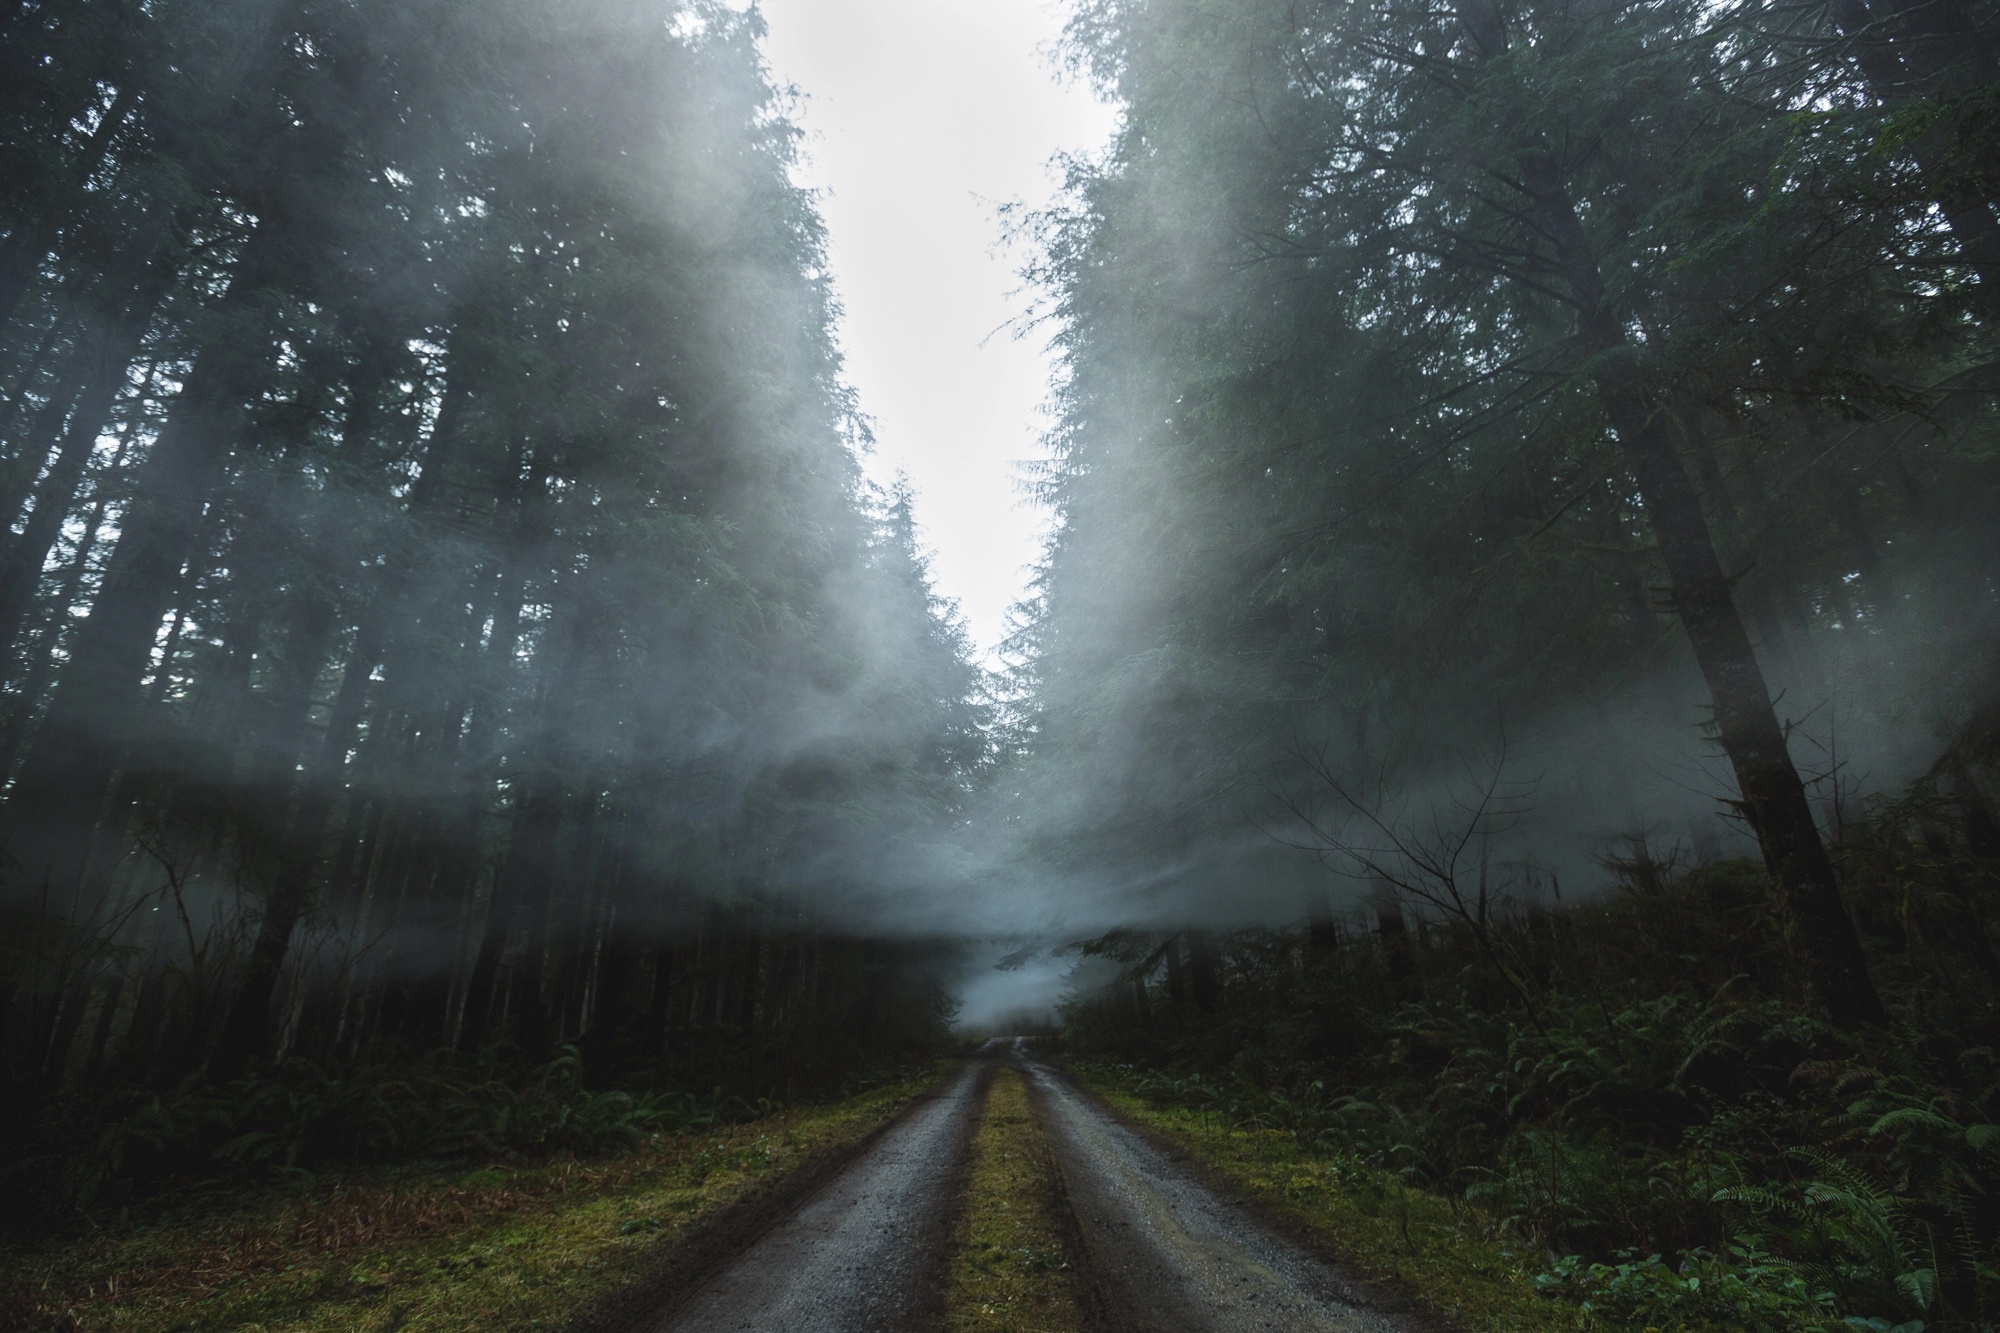 General 2000x1333 trees outdoors road dirt road mist forest